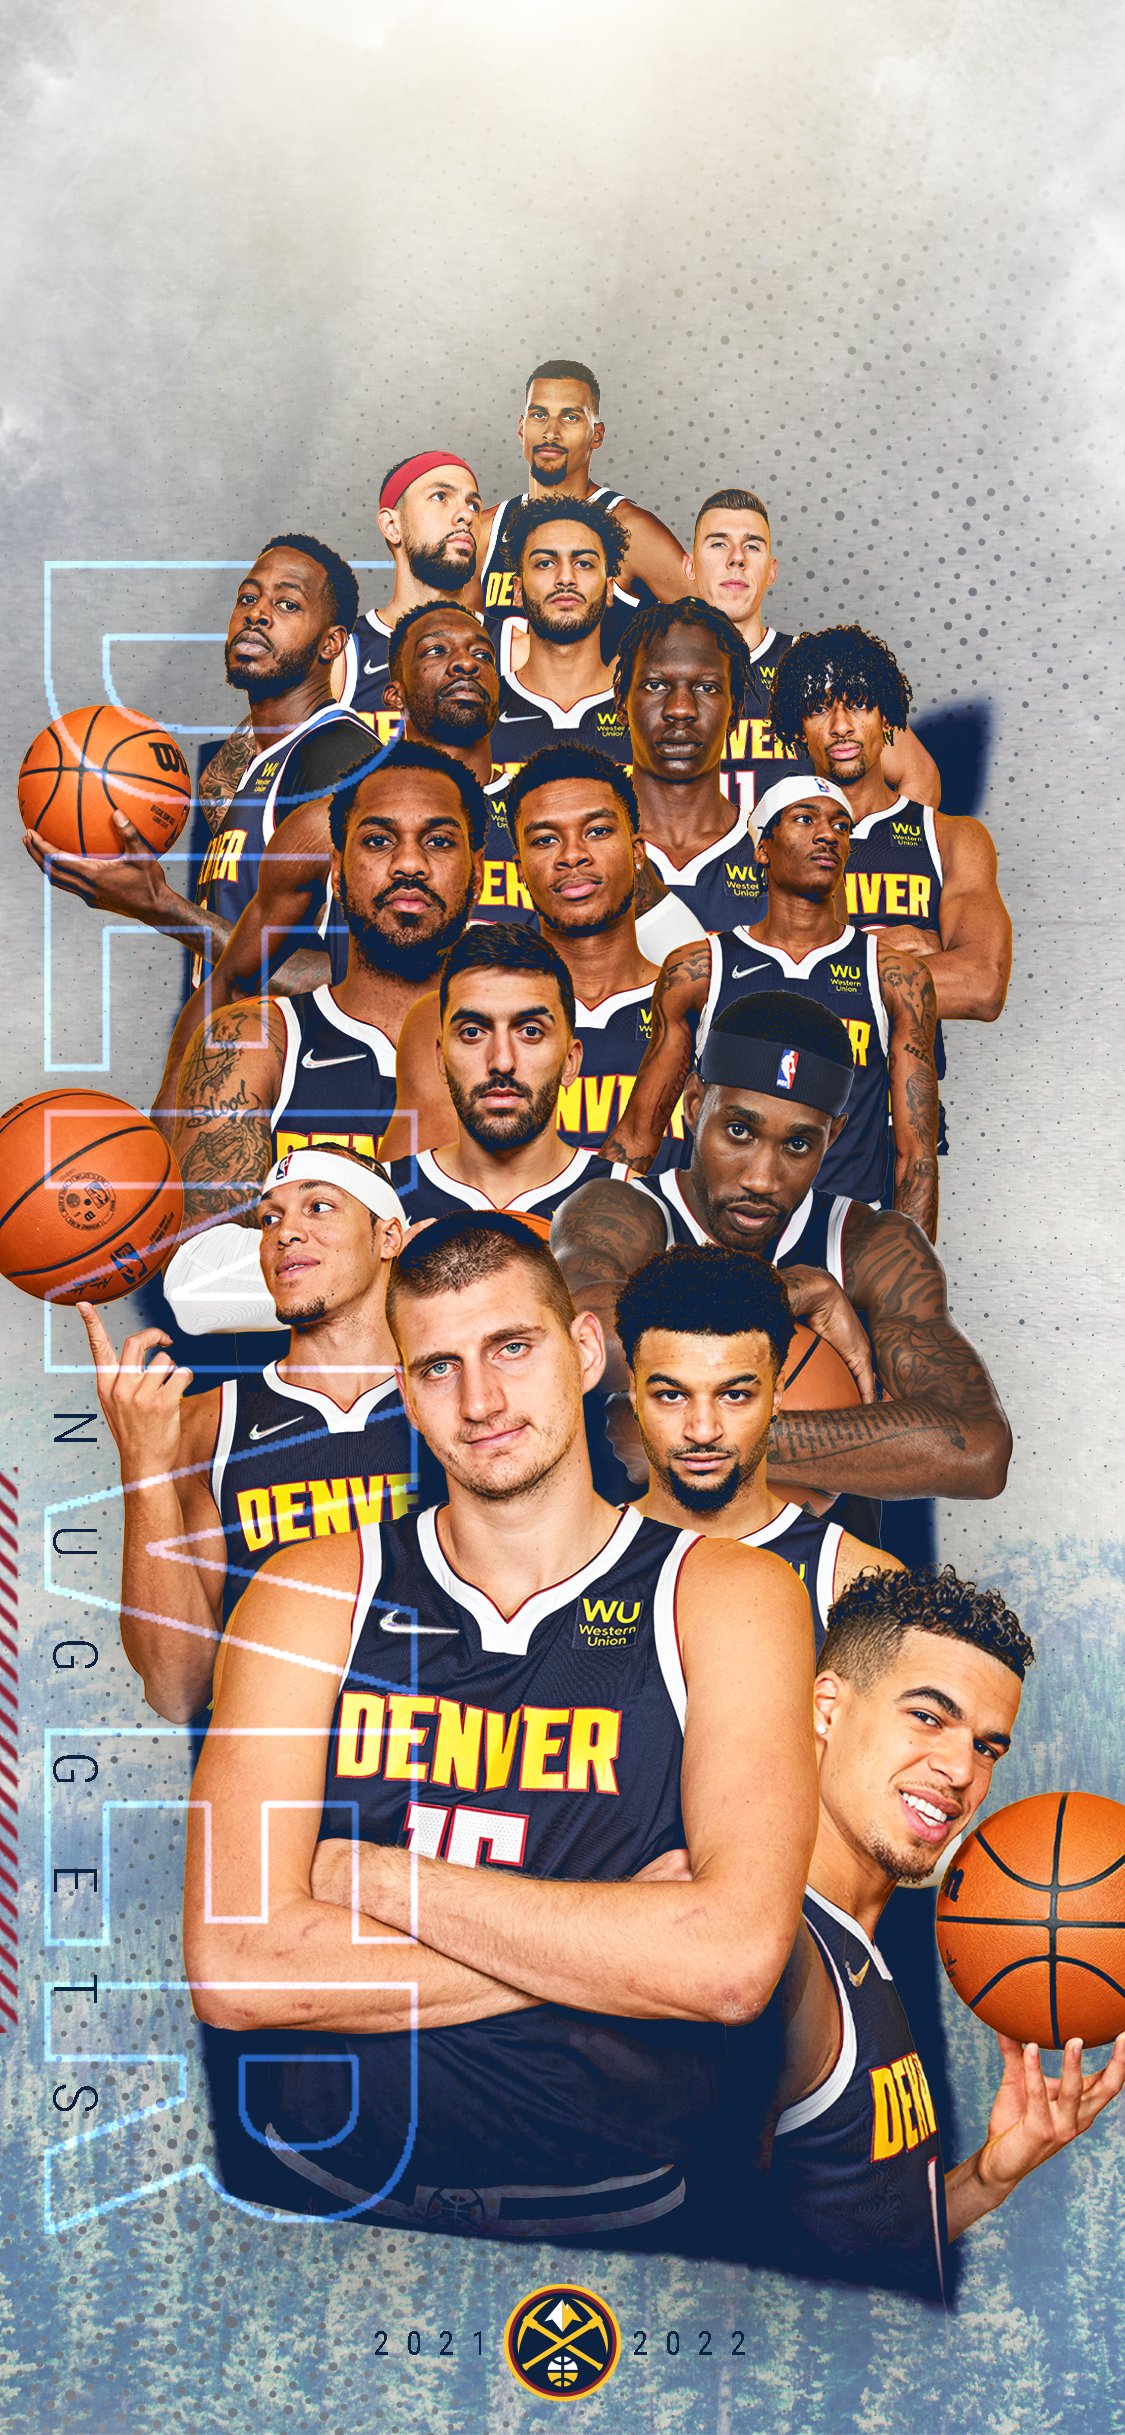 Denver nuggets on new season new wallpapers ð wallpaperwednesday httpstcomlxyhqocn